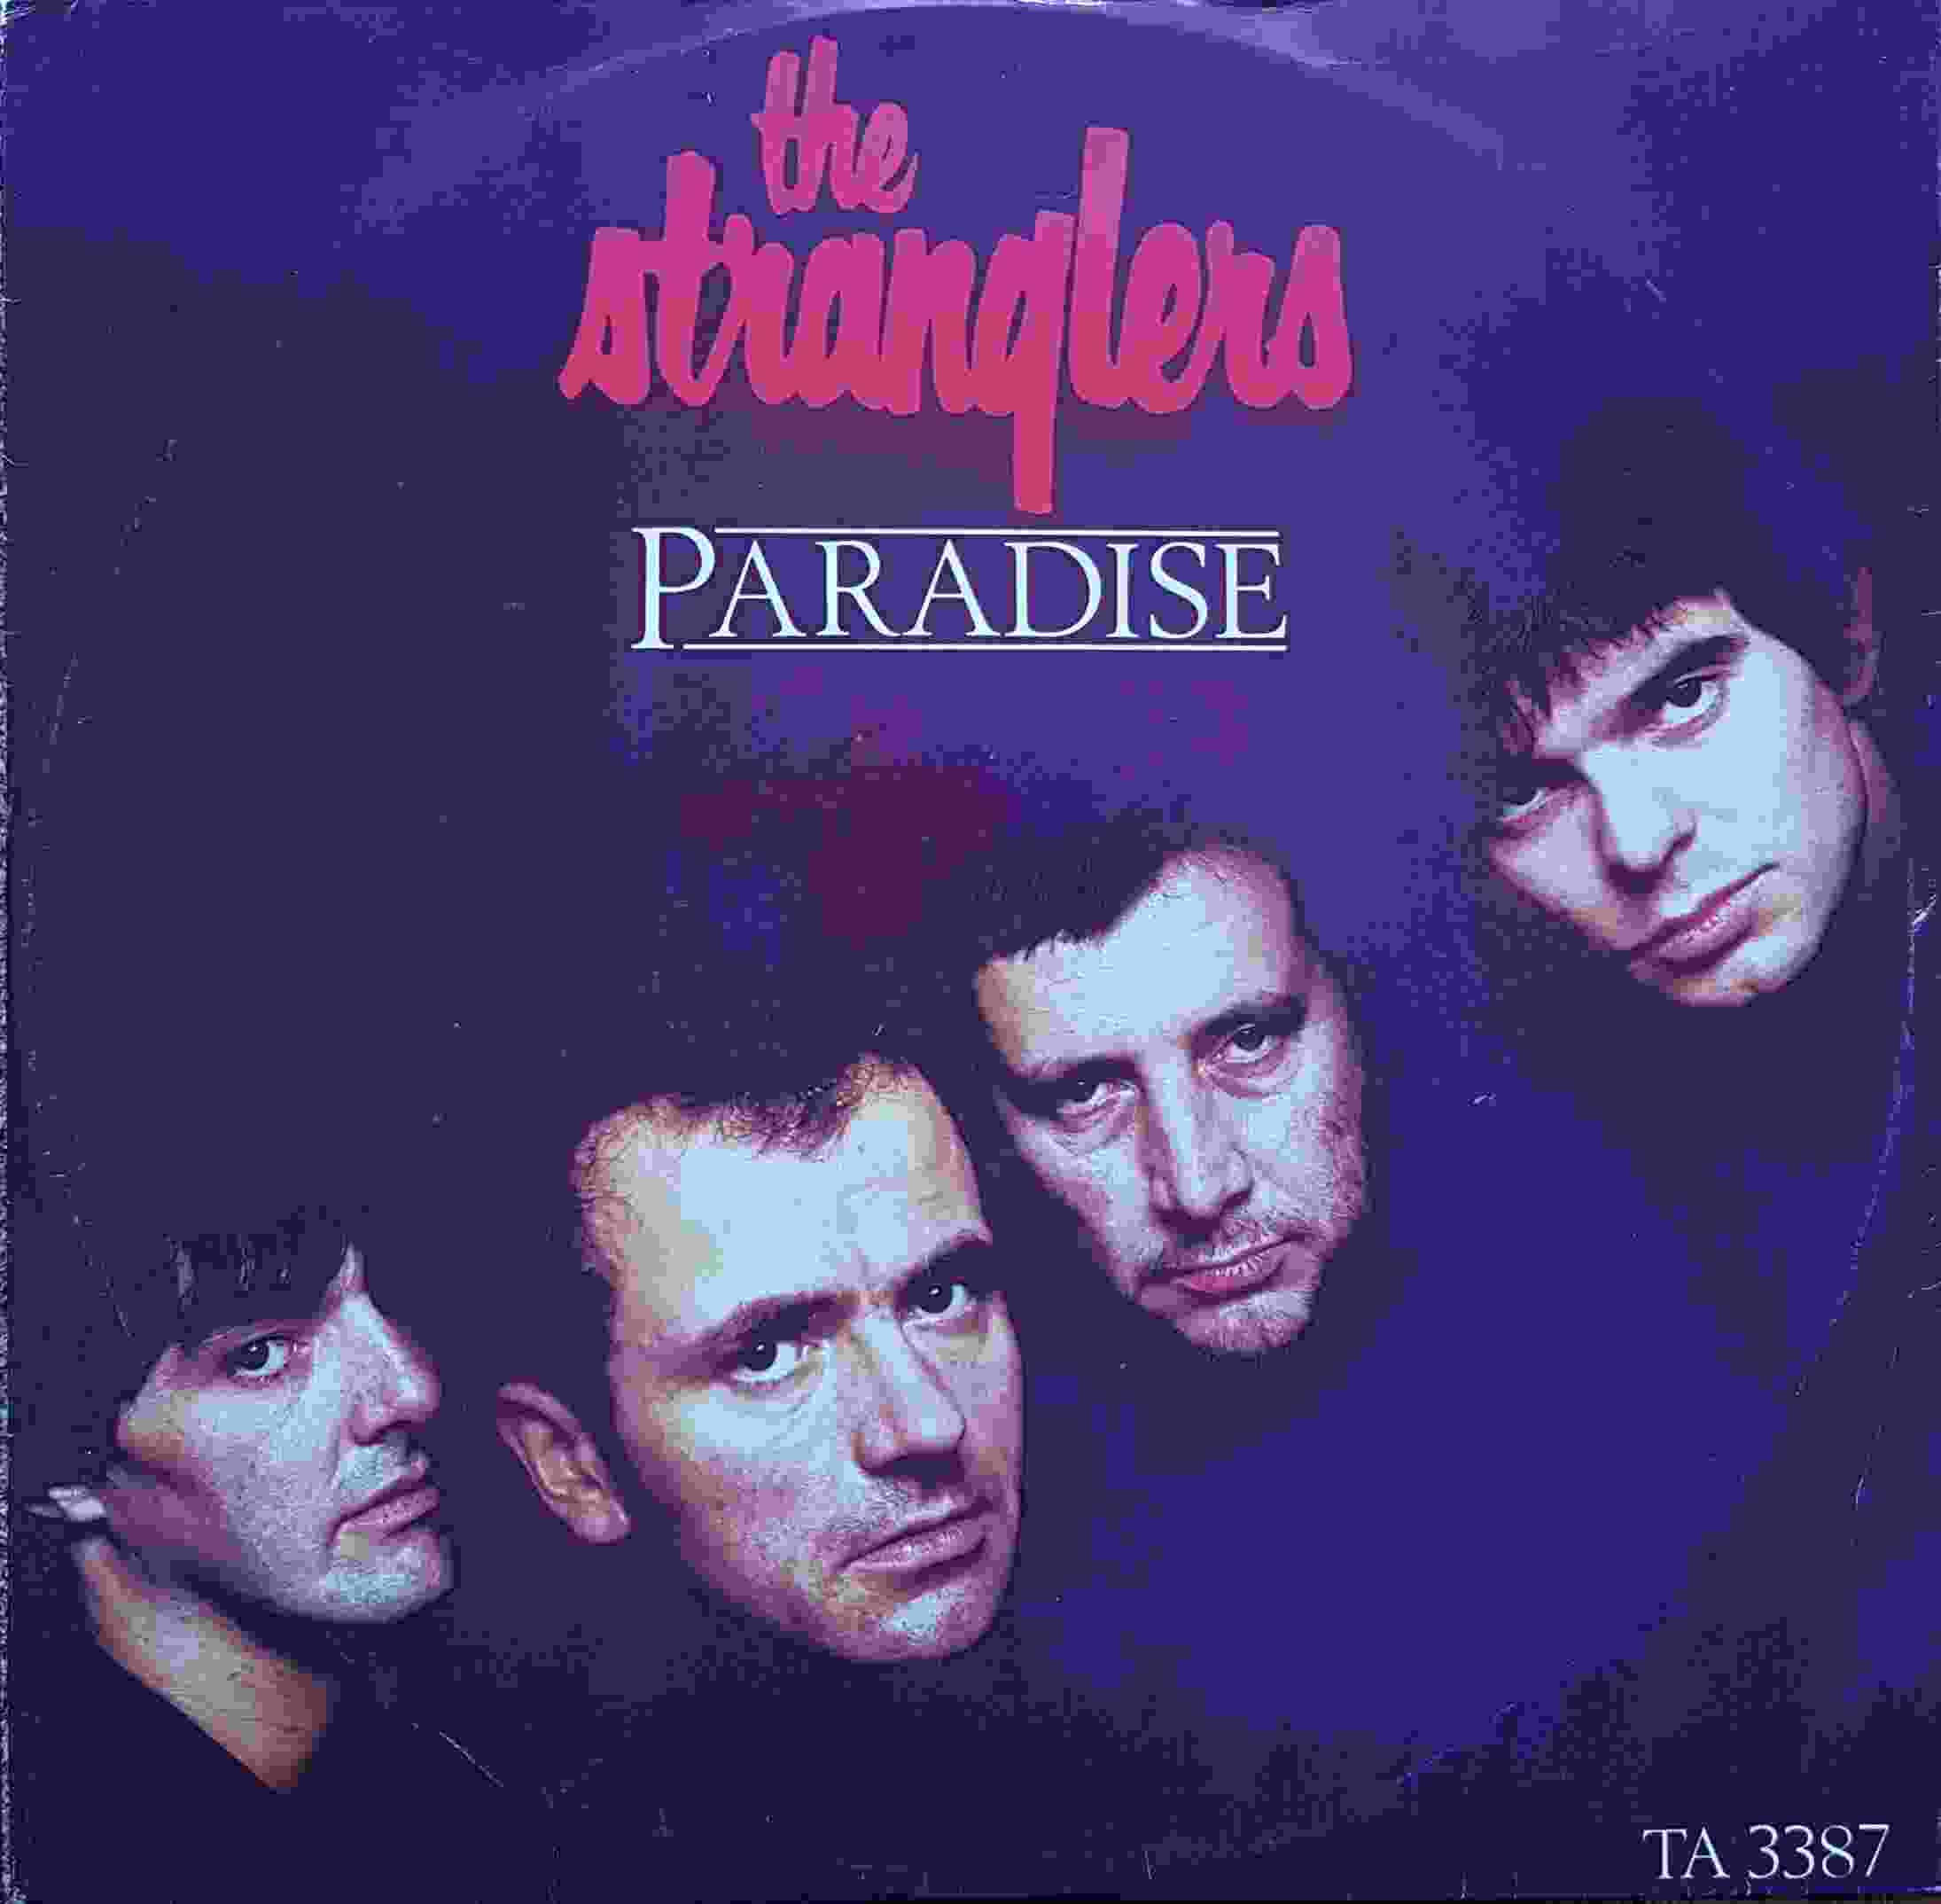 Picture of Paradise by artist The Stranglers from The Stranglers 12inches